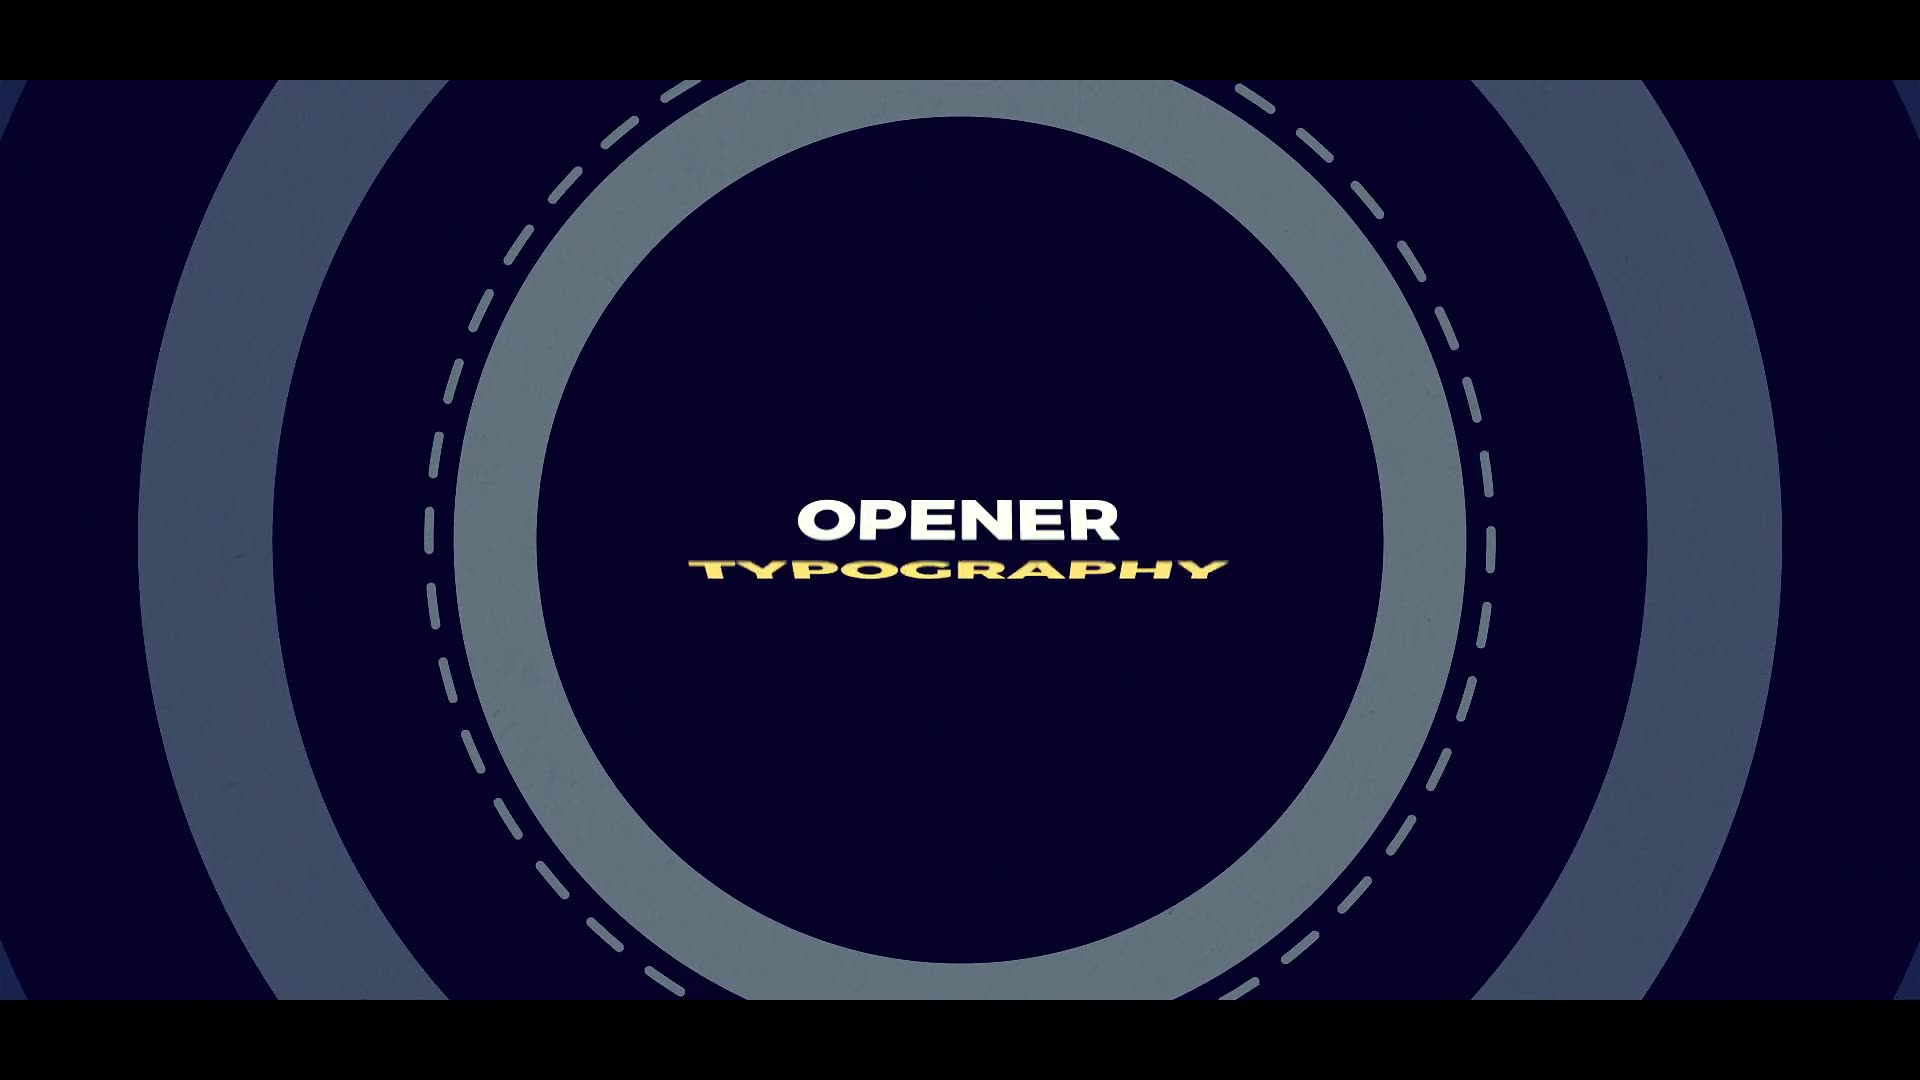 Geometry Typography Opener - Download Videohive 19701539